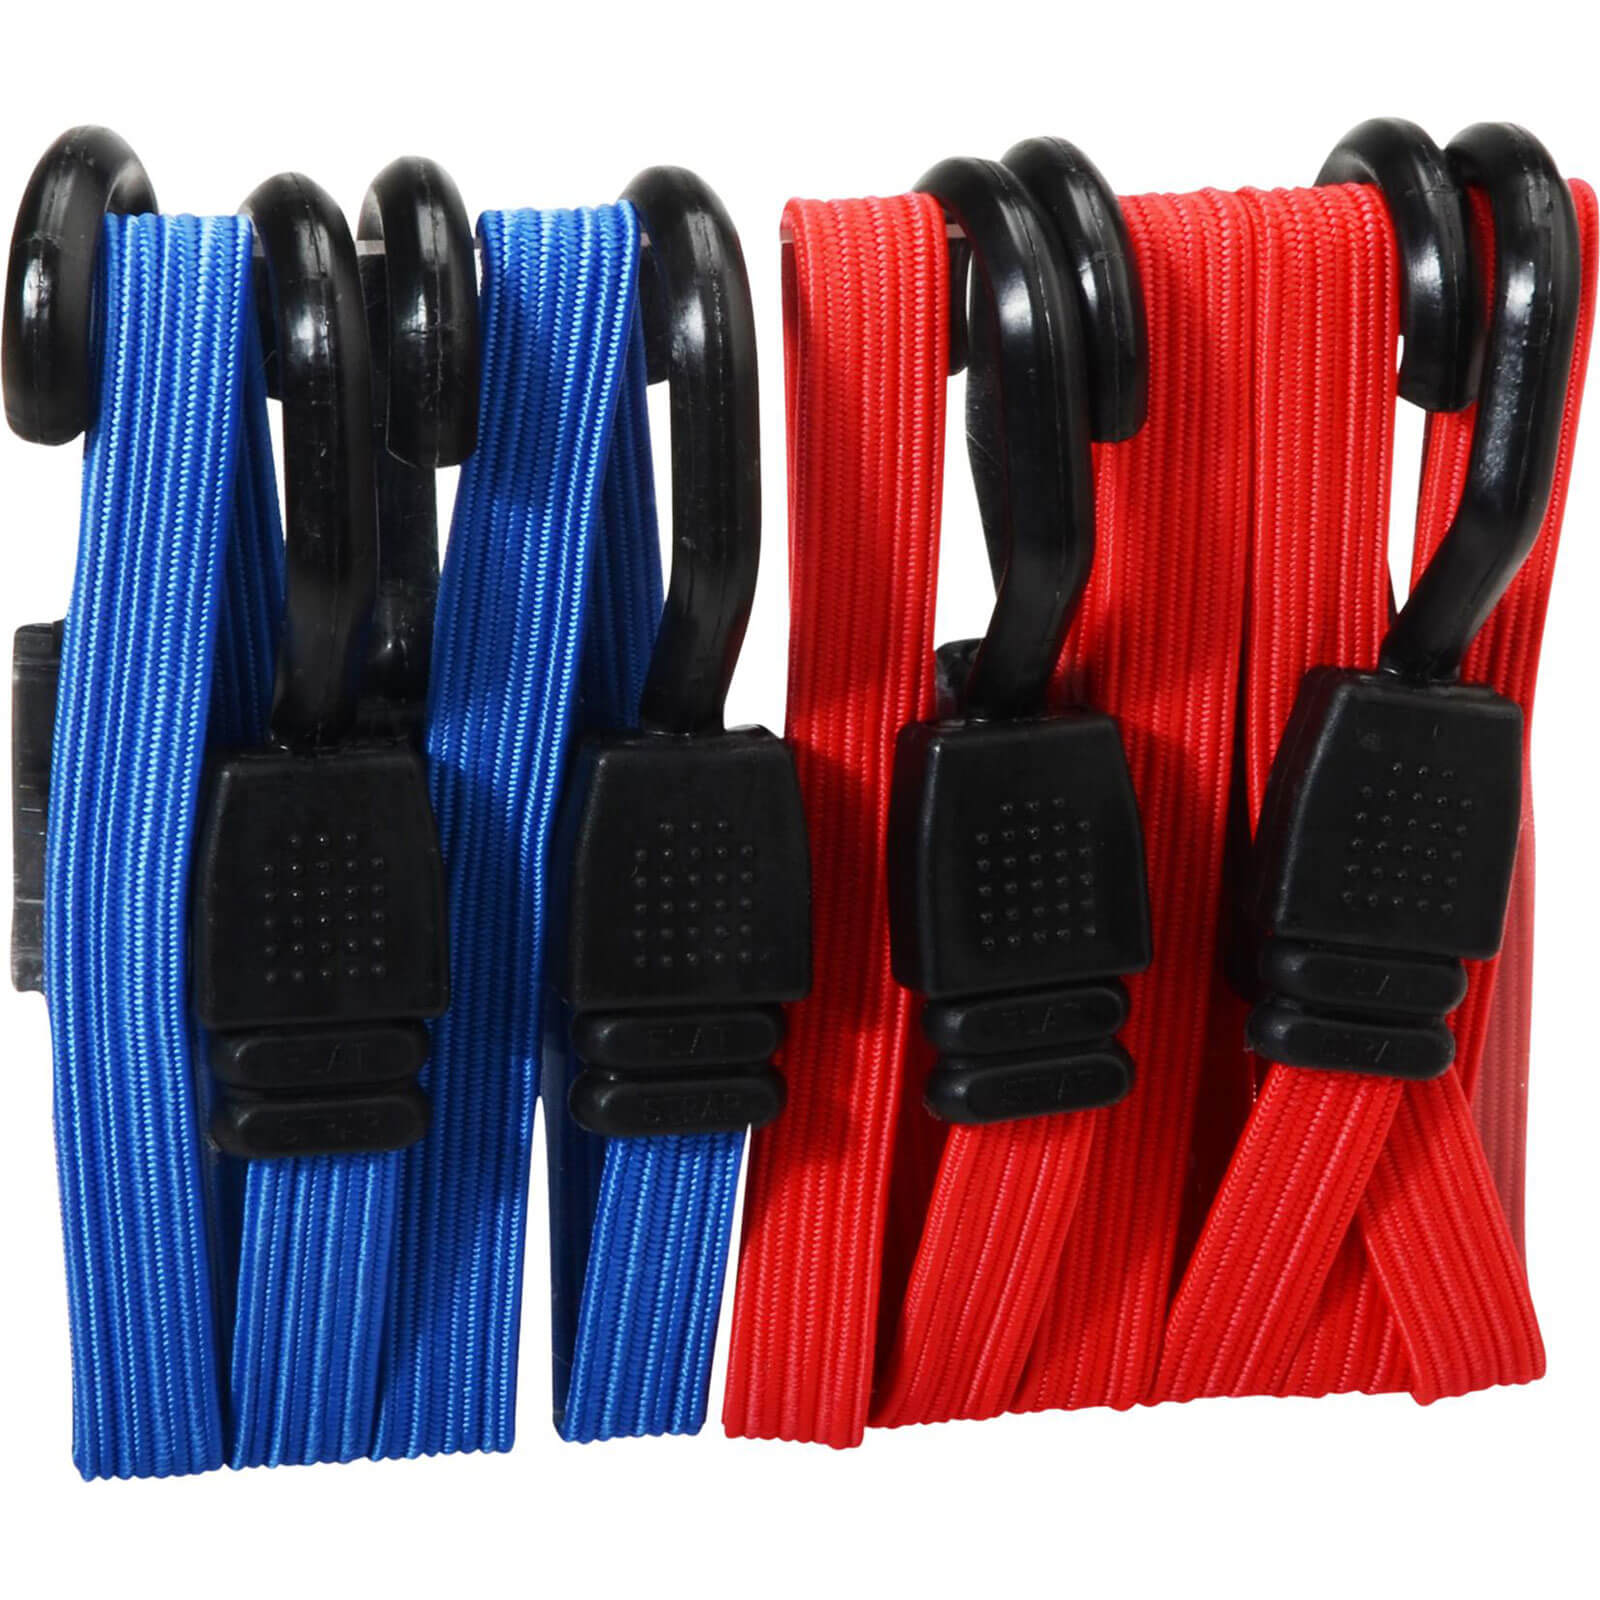 Set of 4 Blue/Red Faithfull Flat Style Bungee Cords 